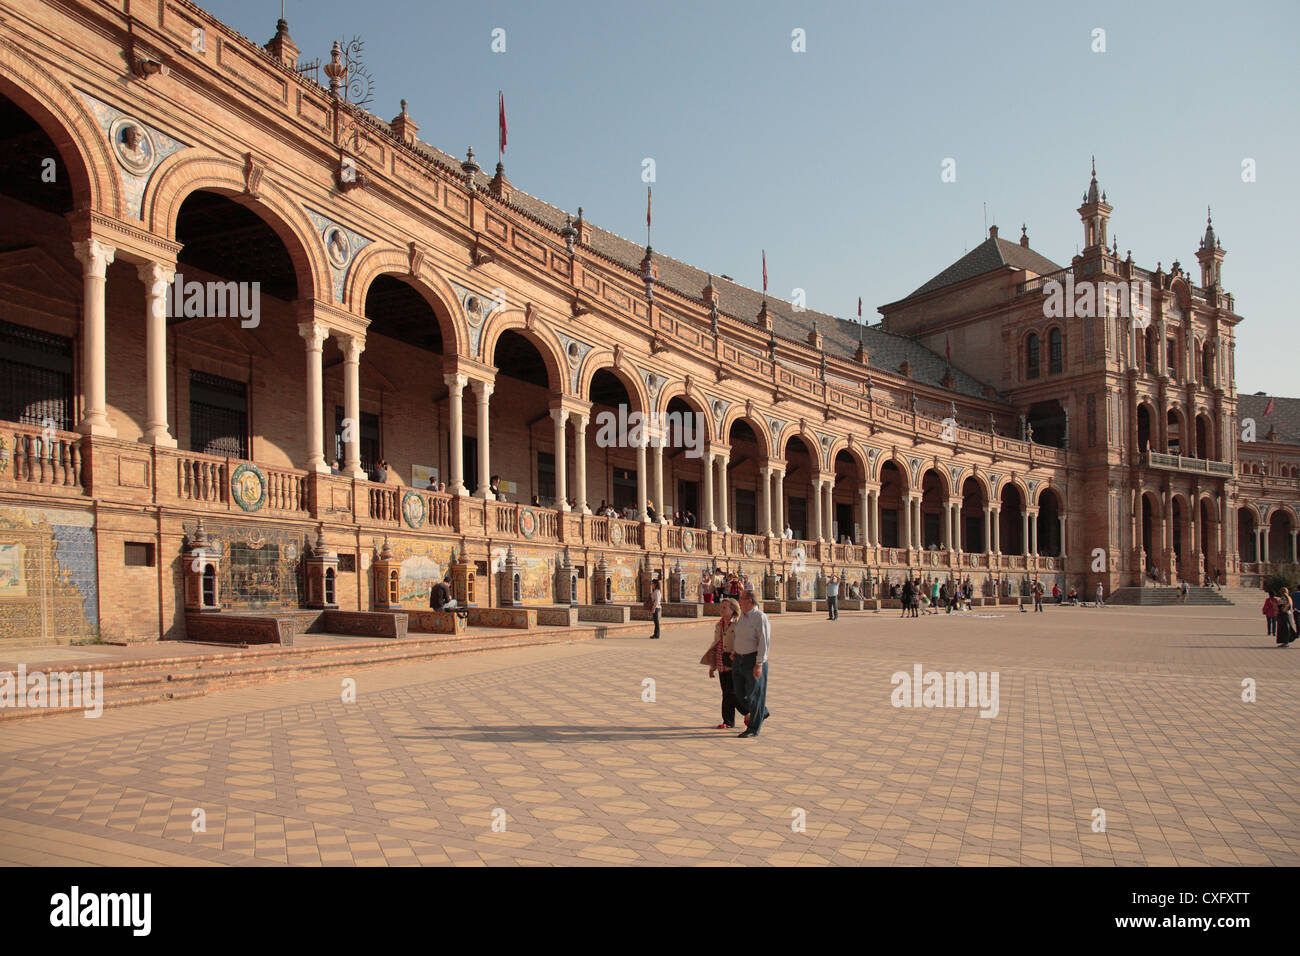 Couple walking in the Plaza de Espana Seville Spain Government buildings overlooking a popular tourist visit. Stock Photo